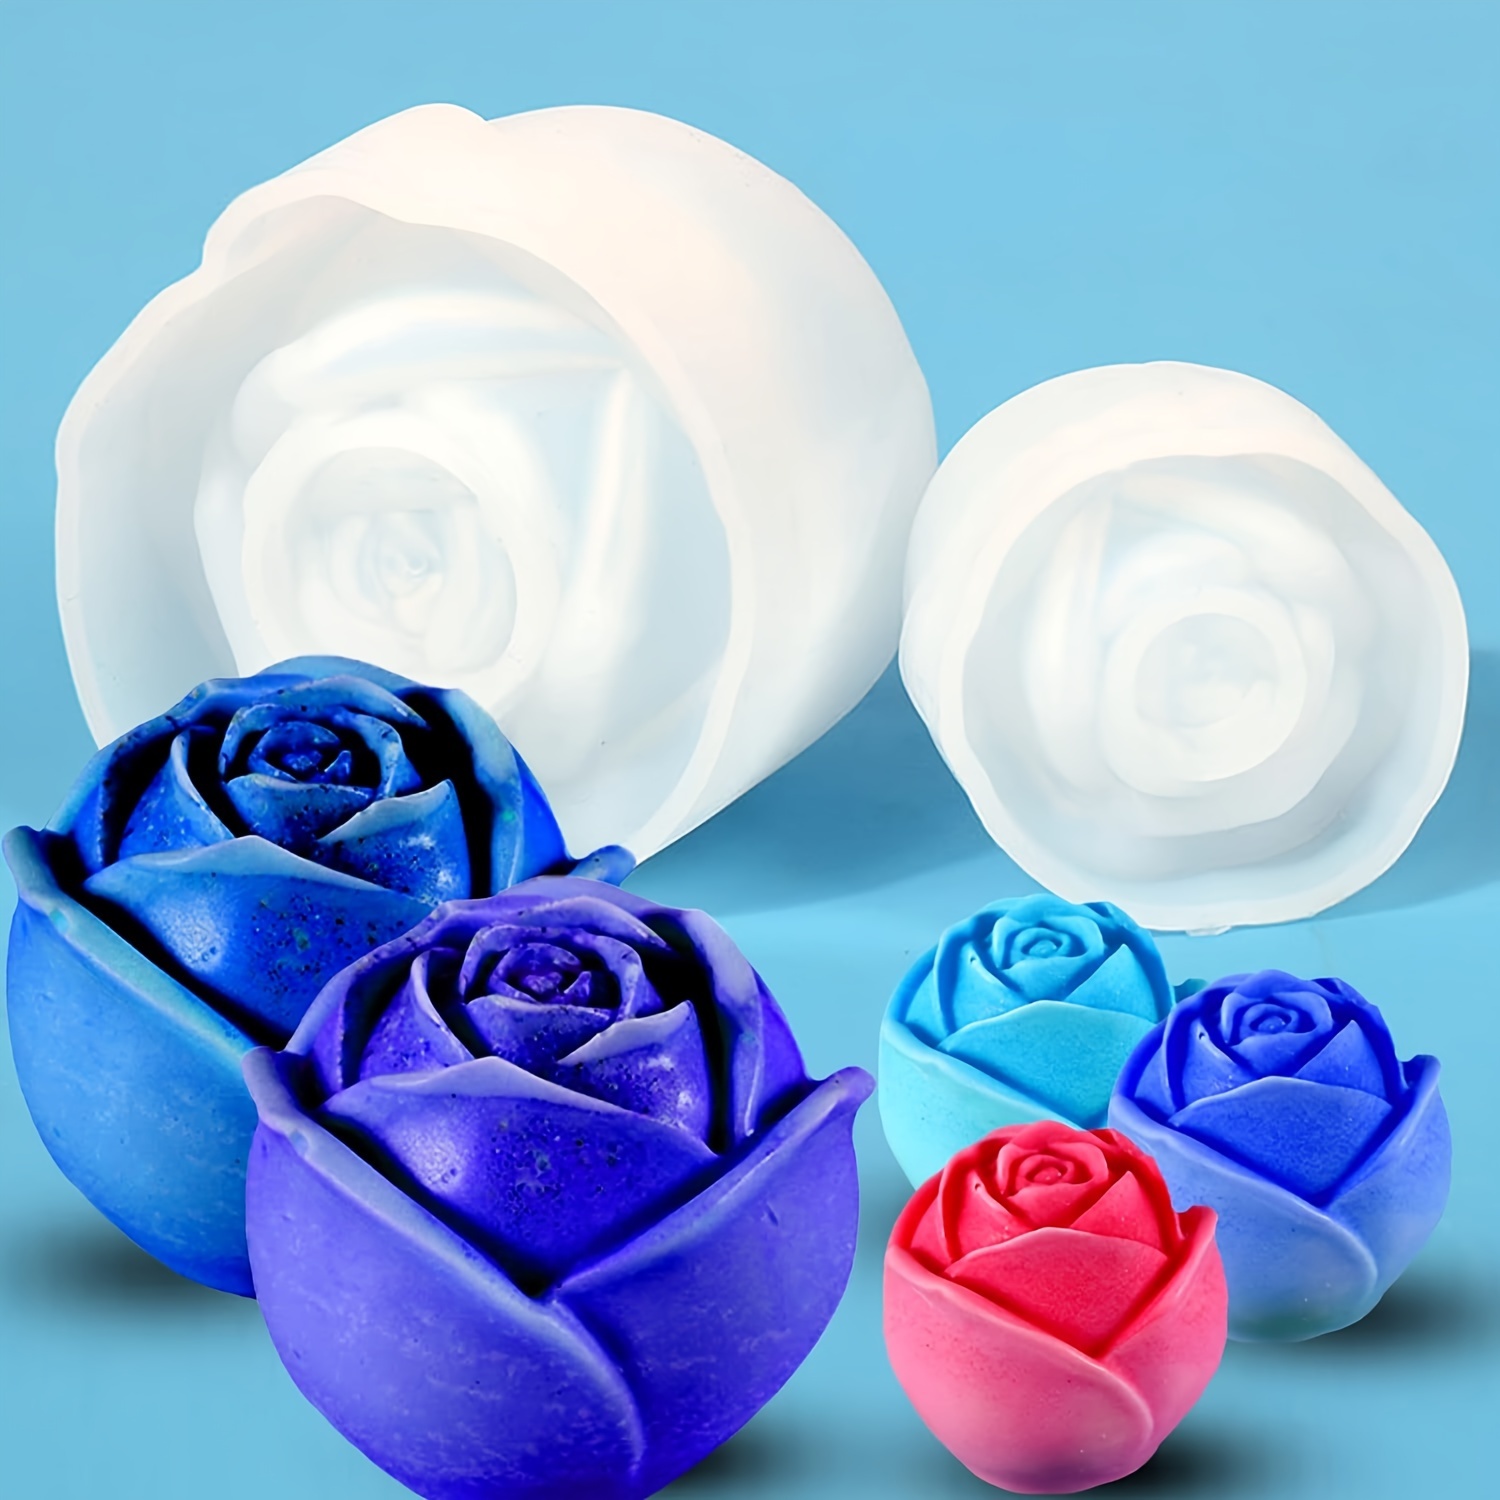 Small Rose Mold